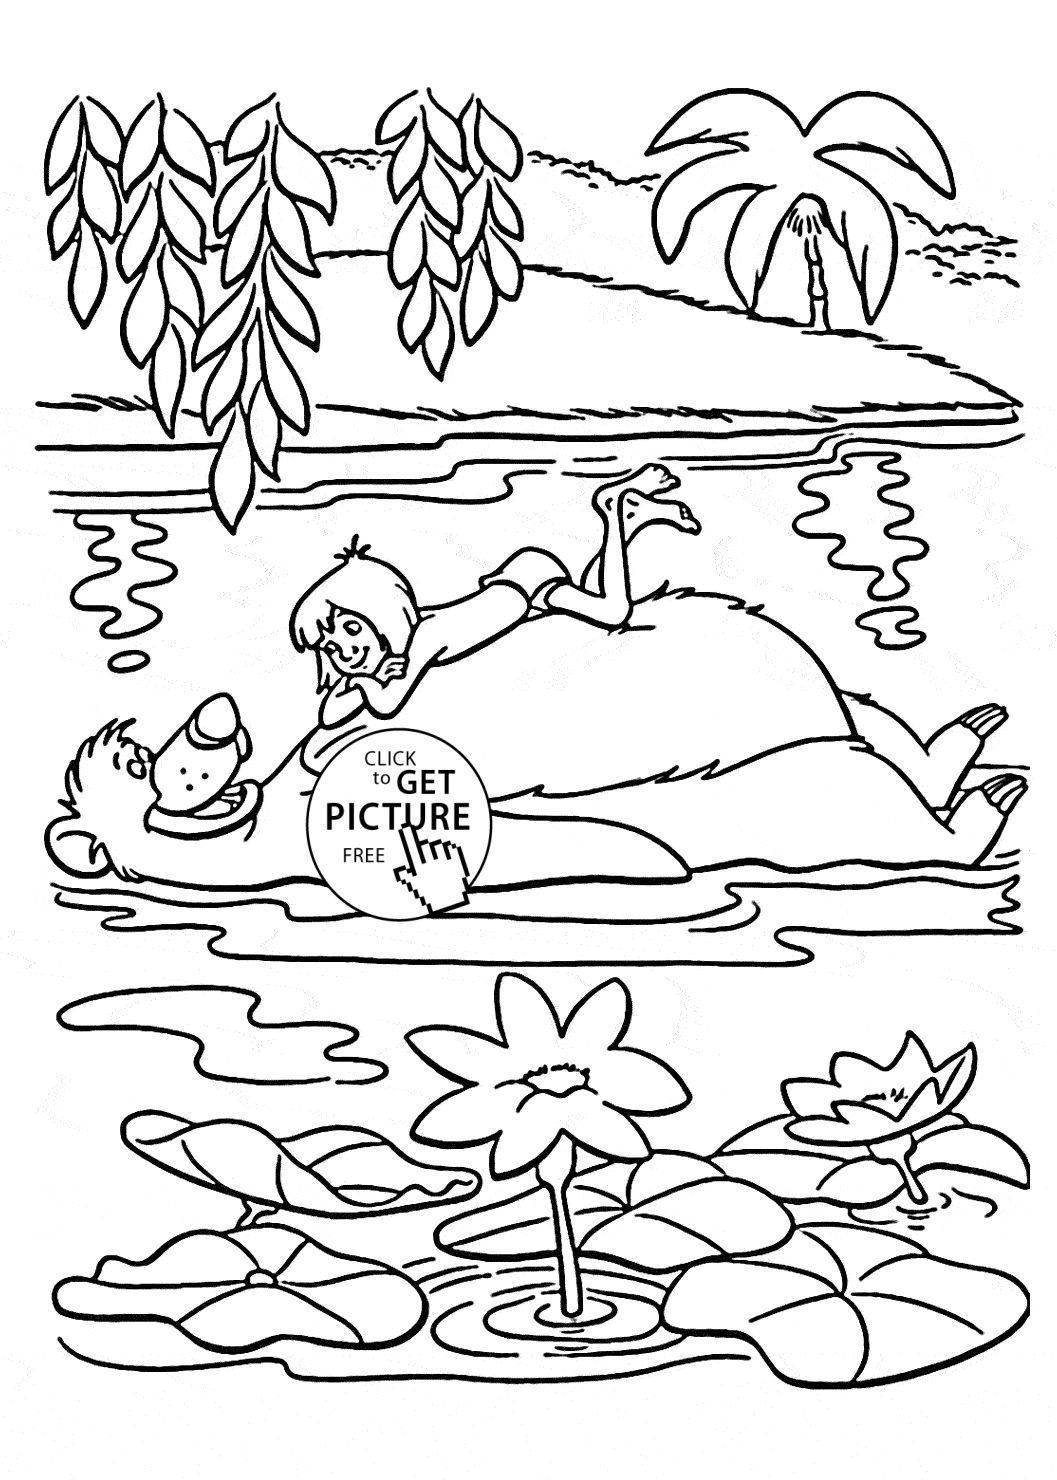 Simple Jungle Coloring Pages Pdf for Adult